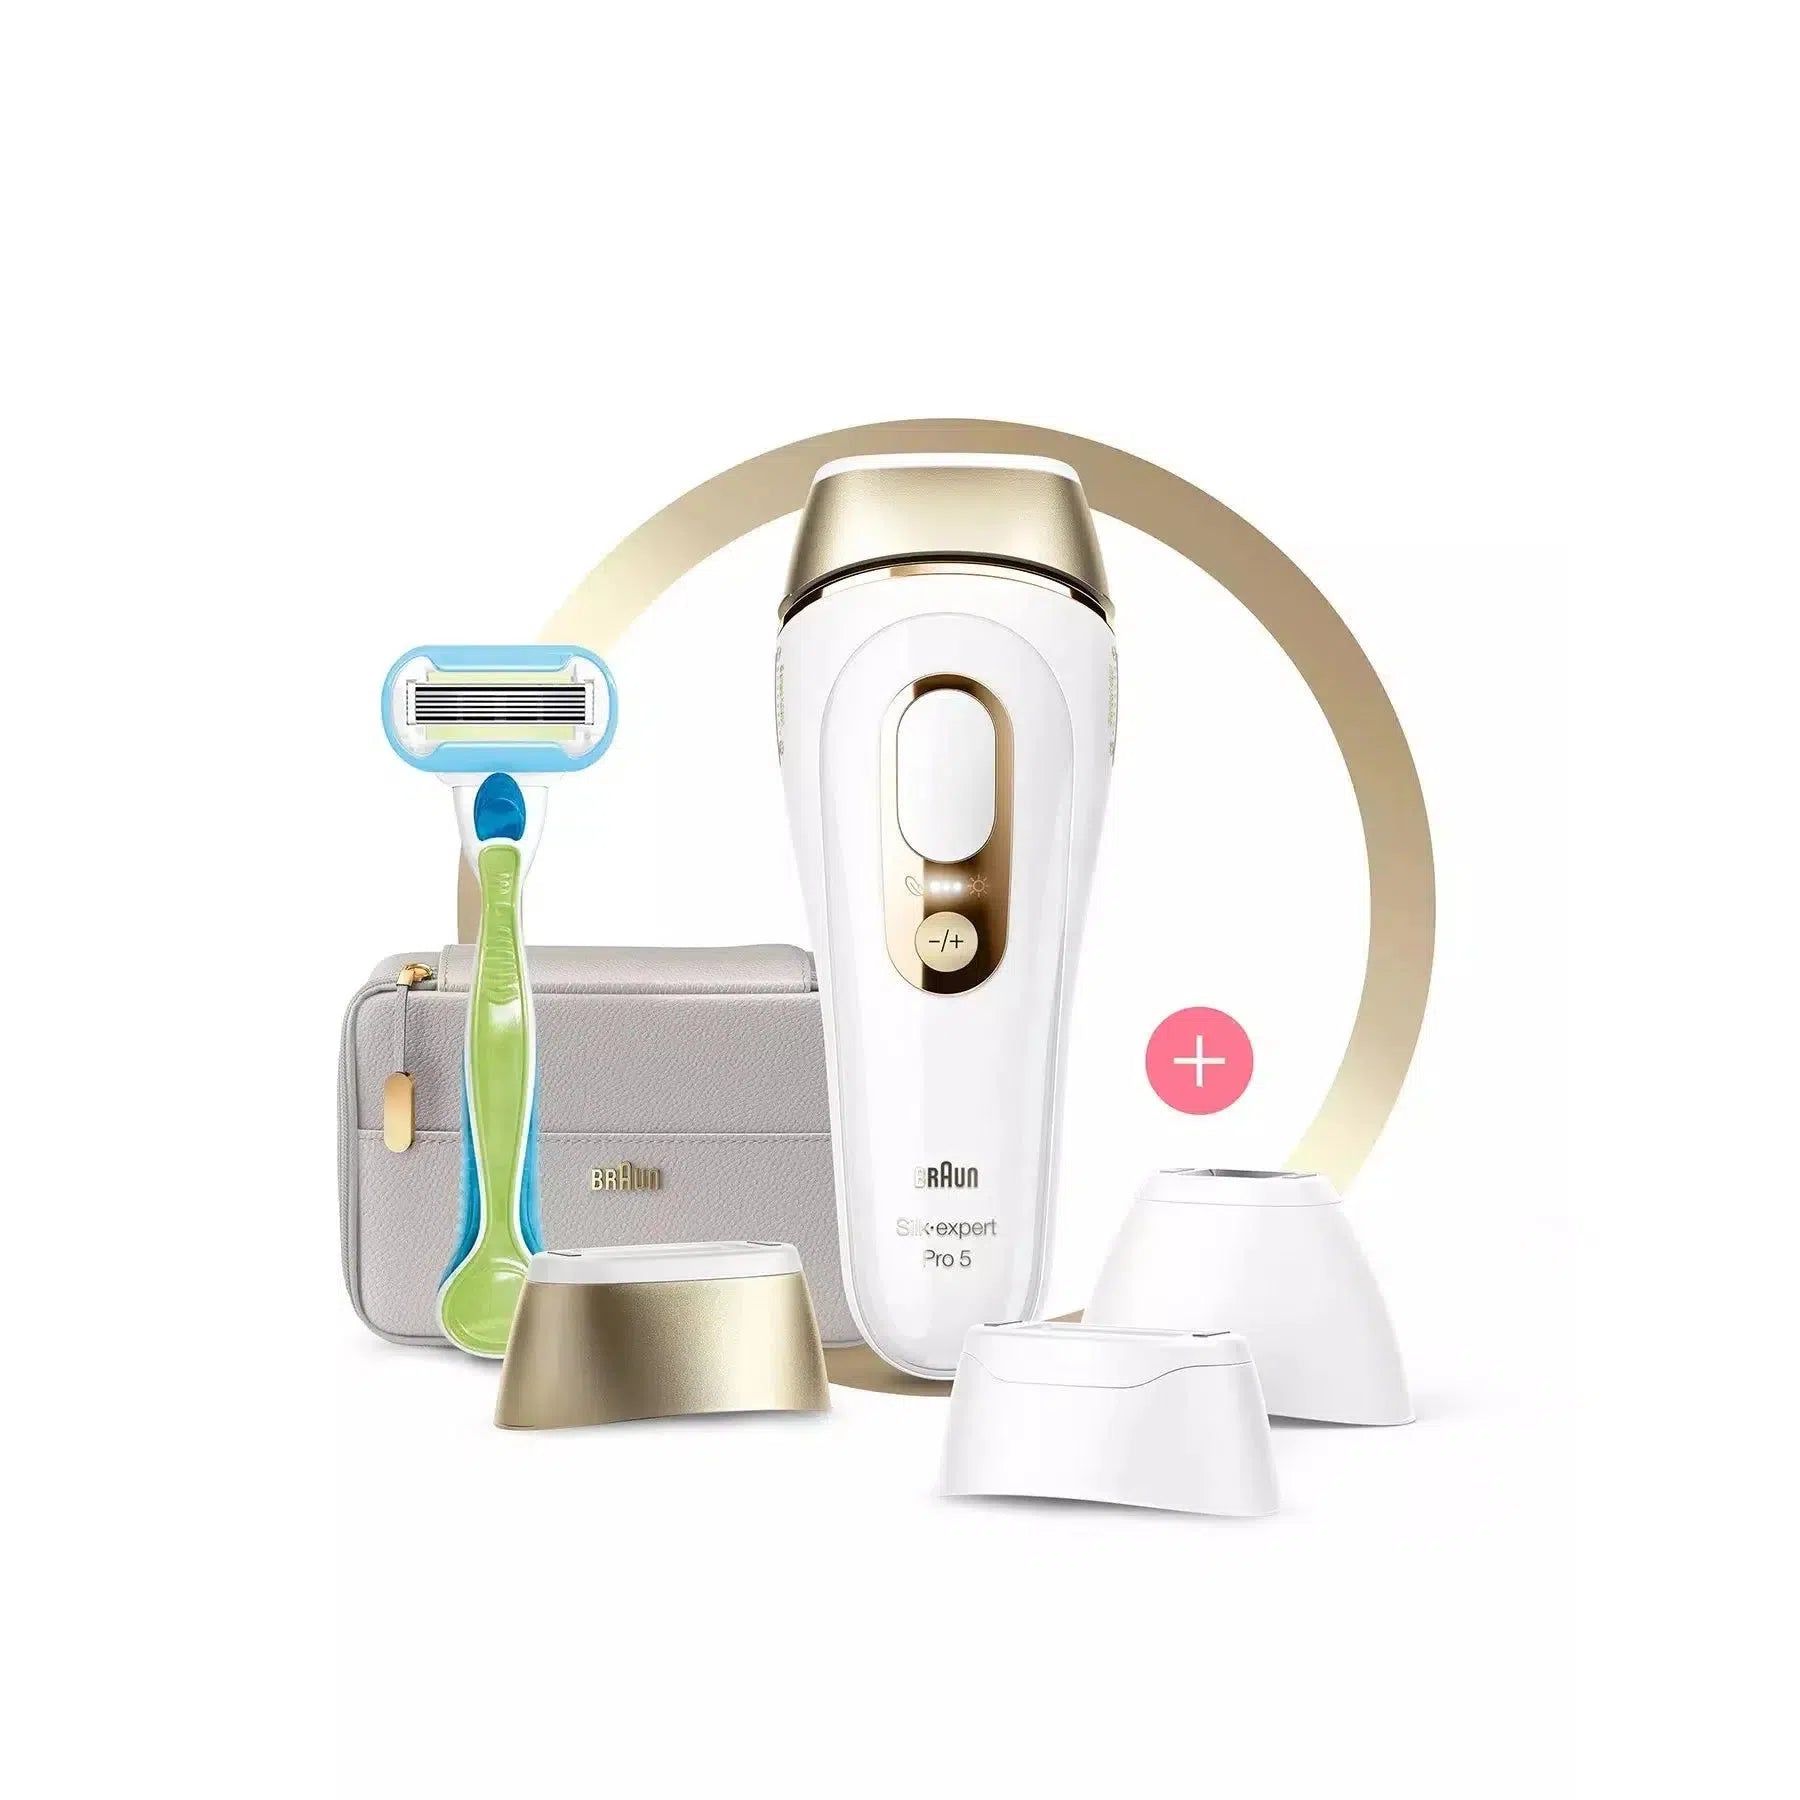 Tried & tested Braun Silk Expert Pro 5 IPL review & quick video